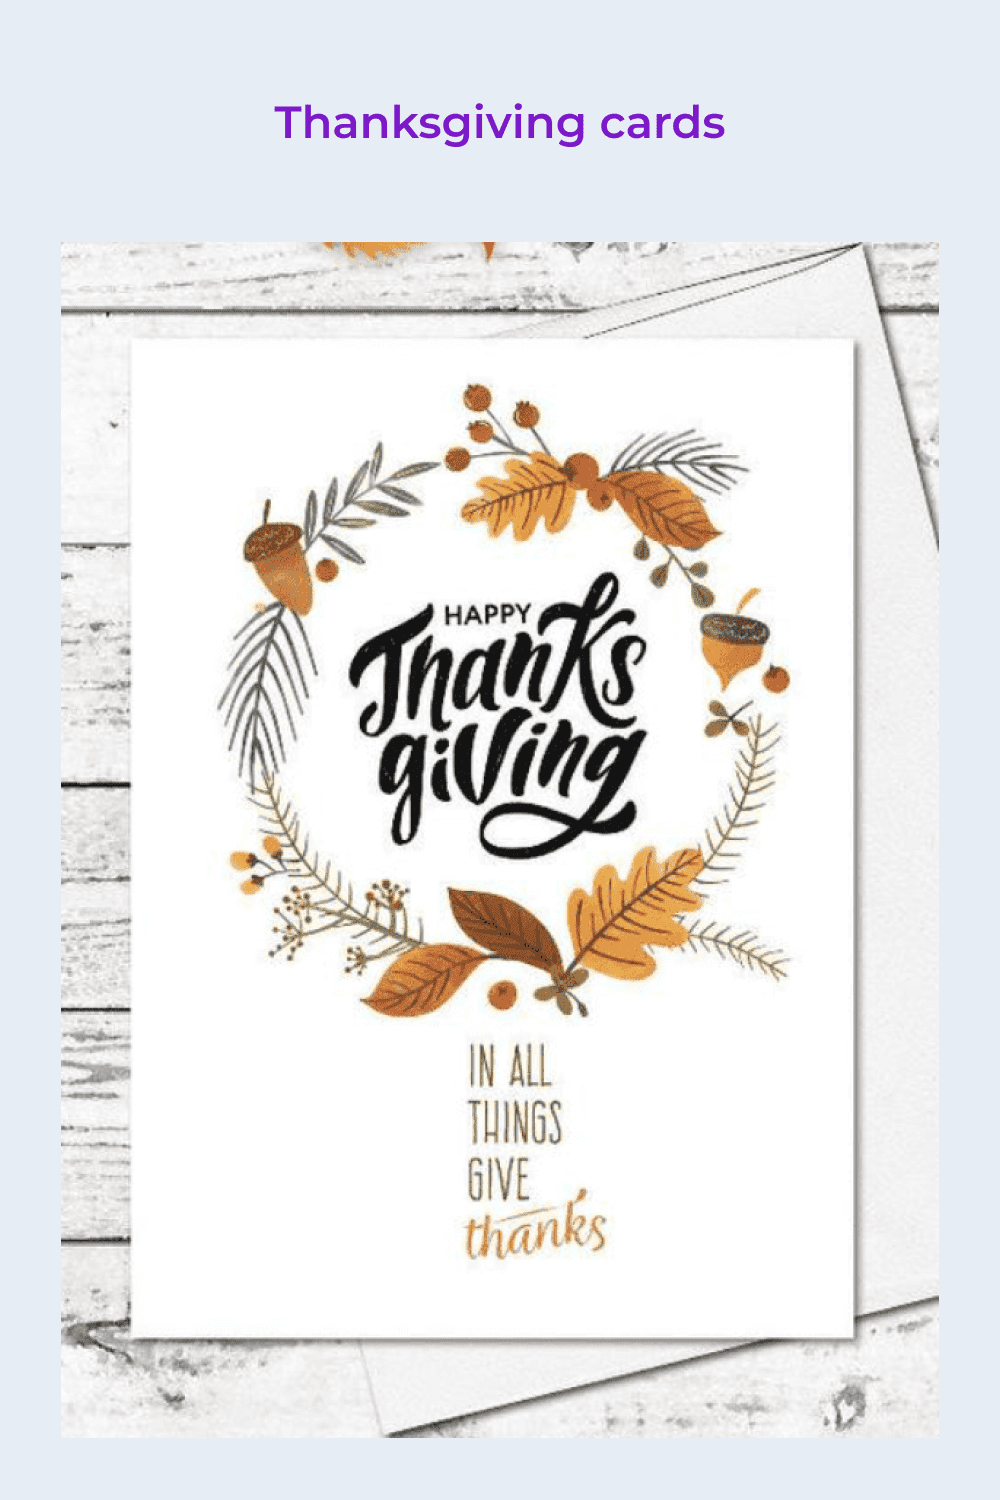 Thanksgiving cards.